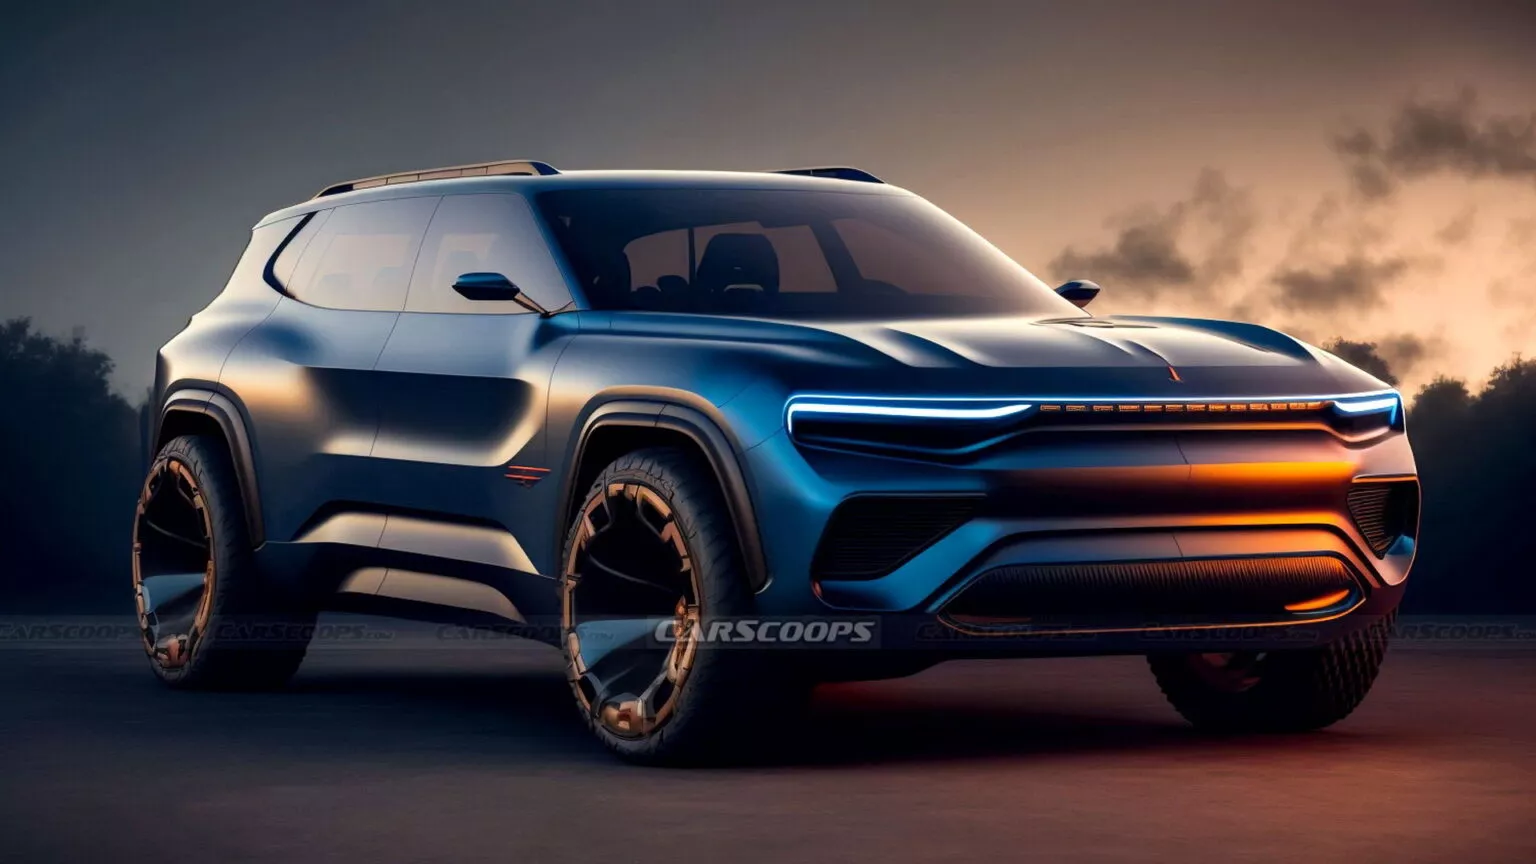 Rendering of the 2027 Dodge Rampage EV, the electric successor to the Durango